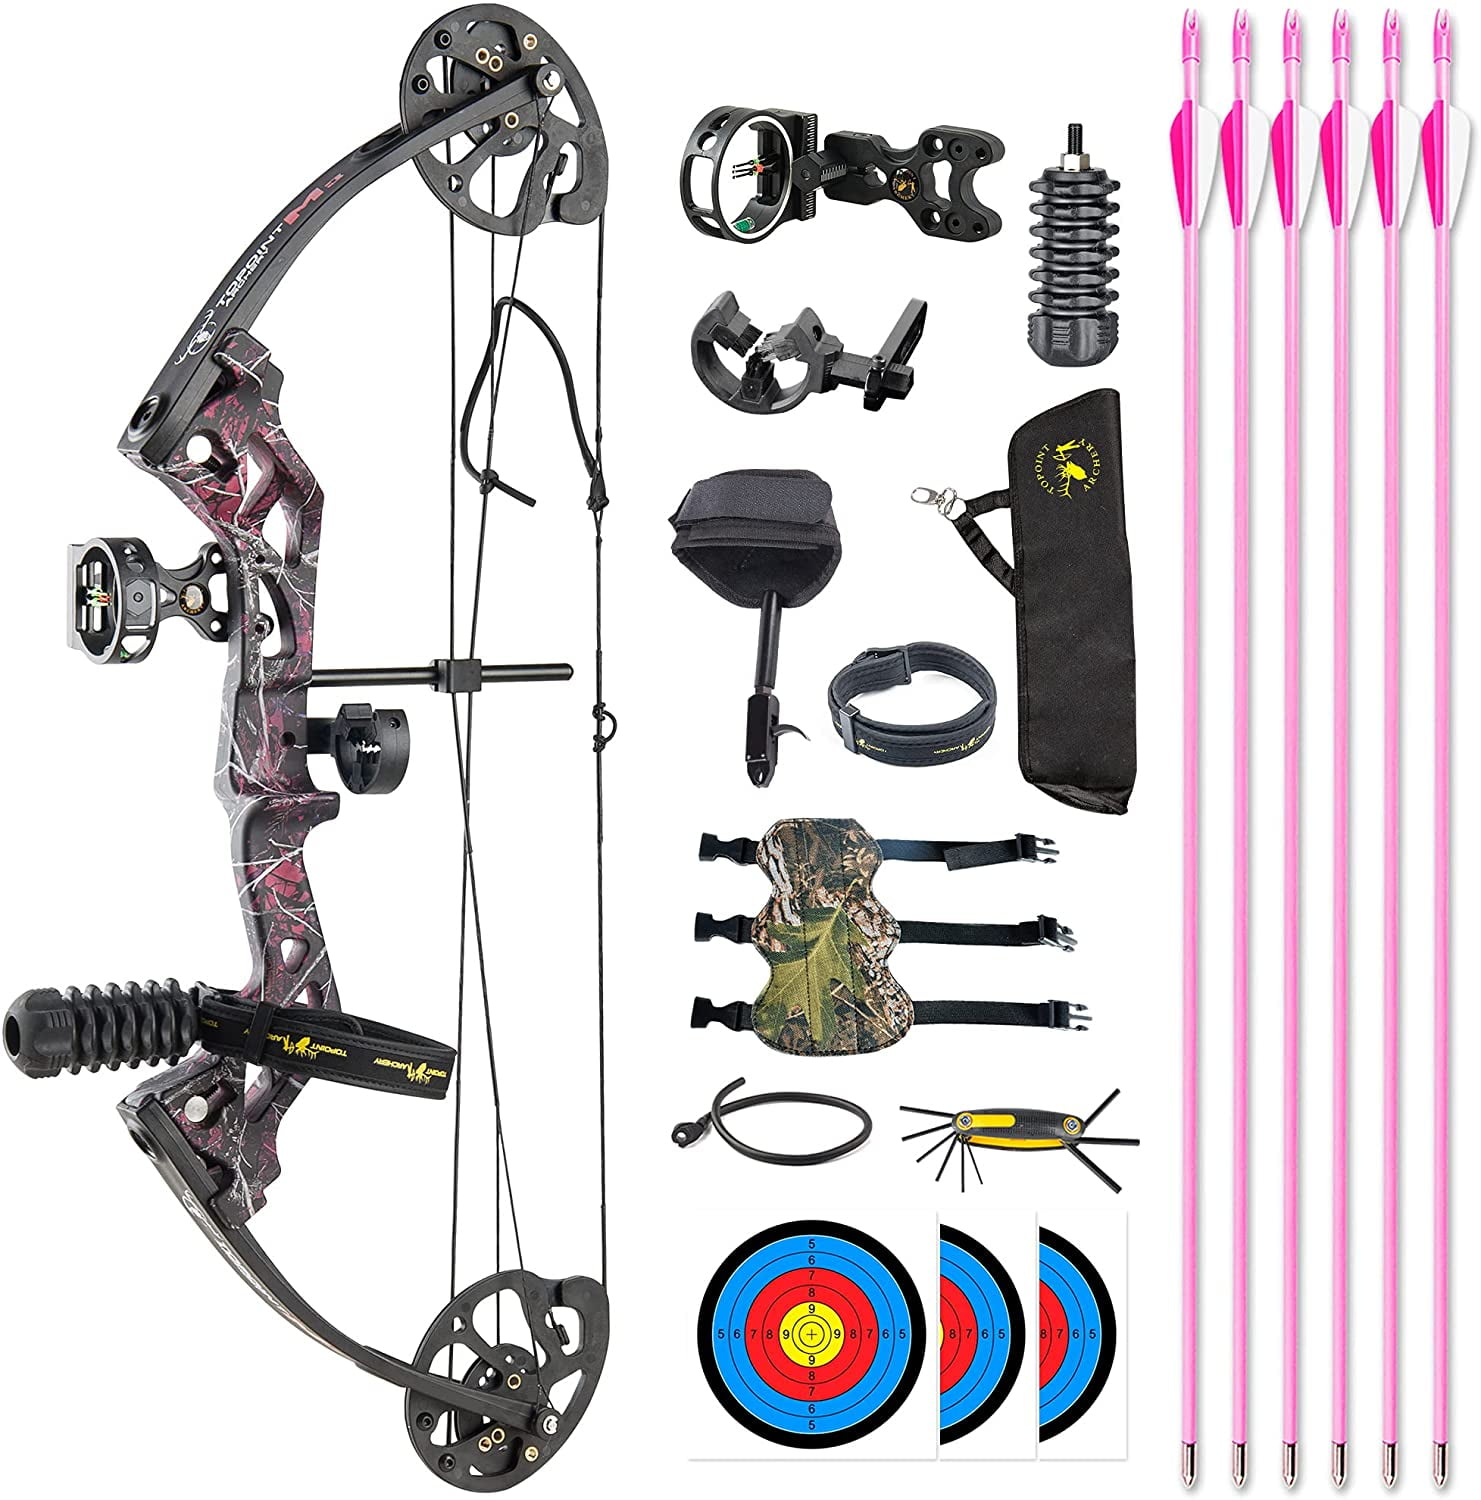 Archery Compound Bow Set for Kids and Juniors,Adjustable 17”-27” Draw Length,10-30 lbs Draw Weight,Complete Package,Right Handed Only